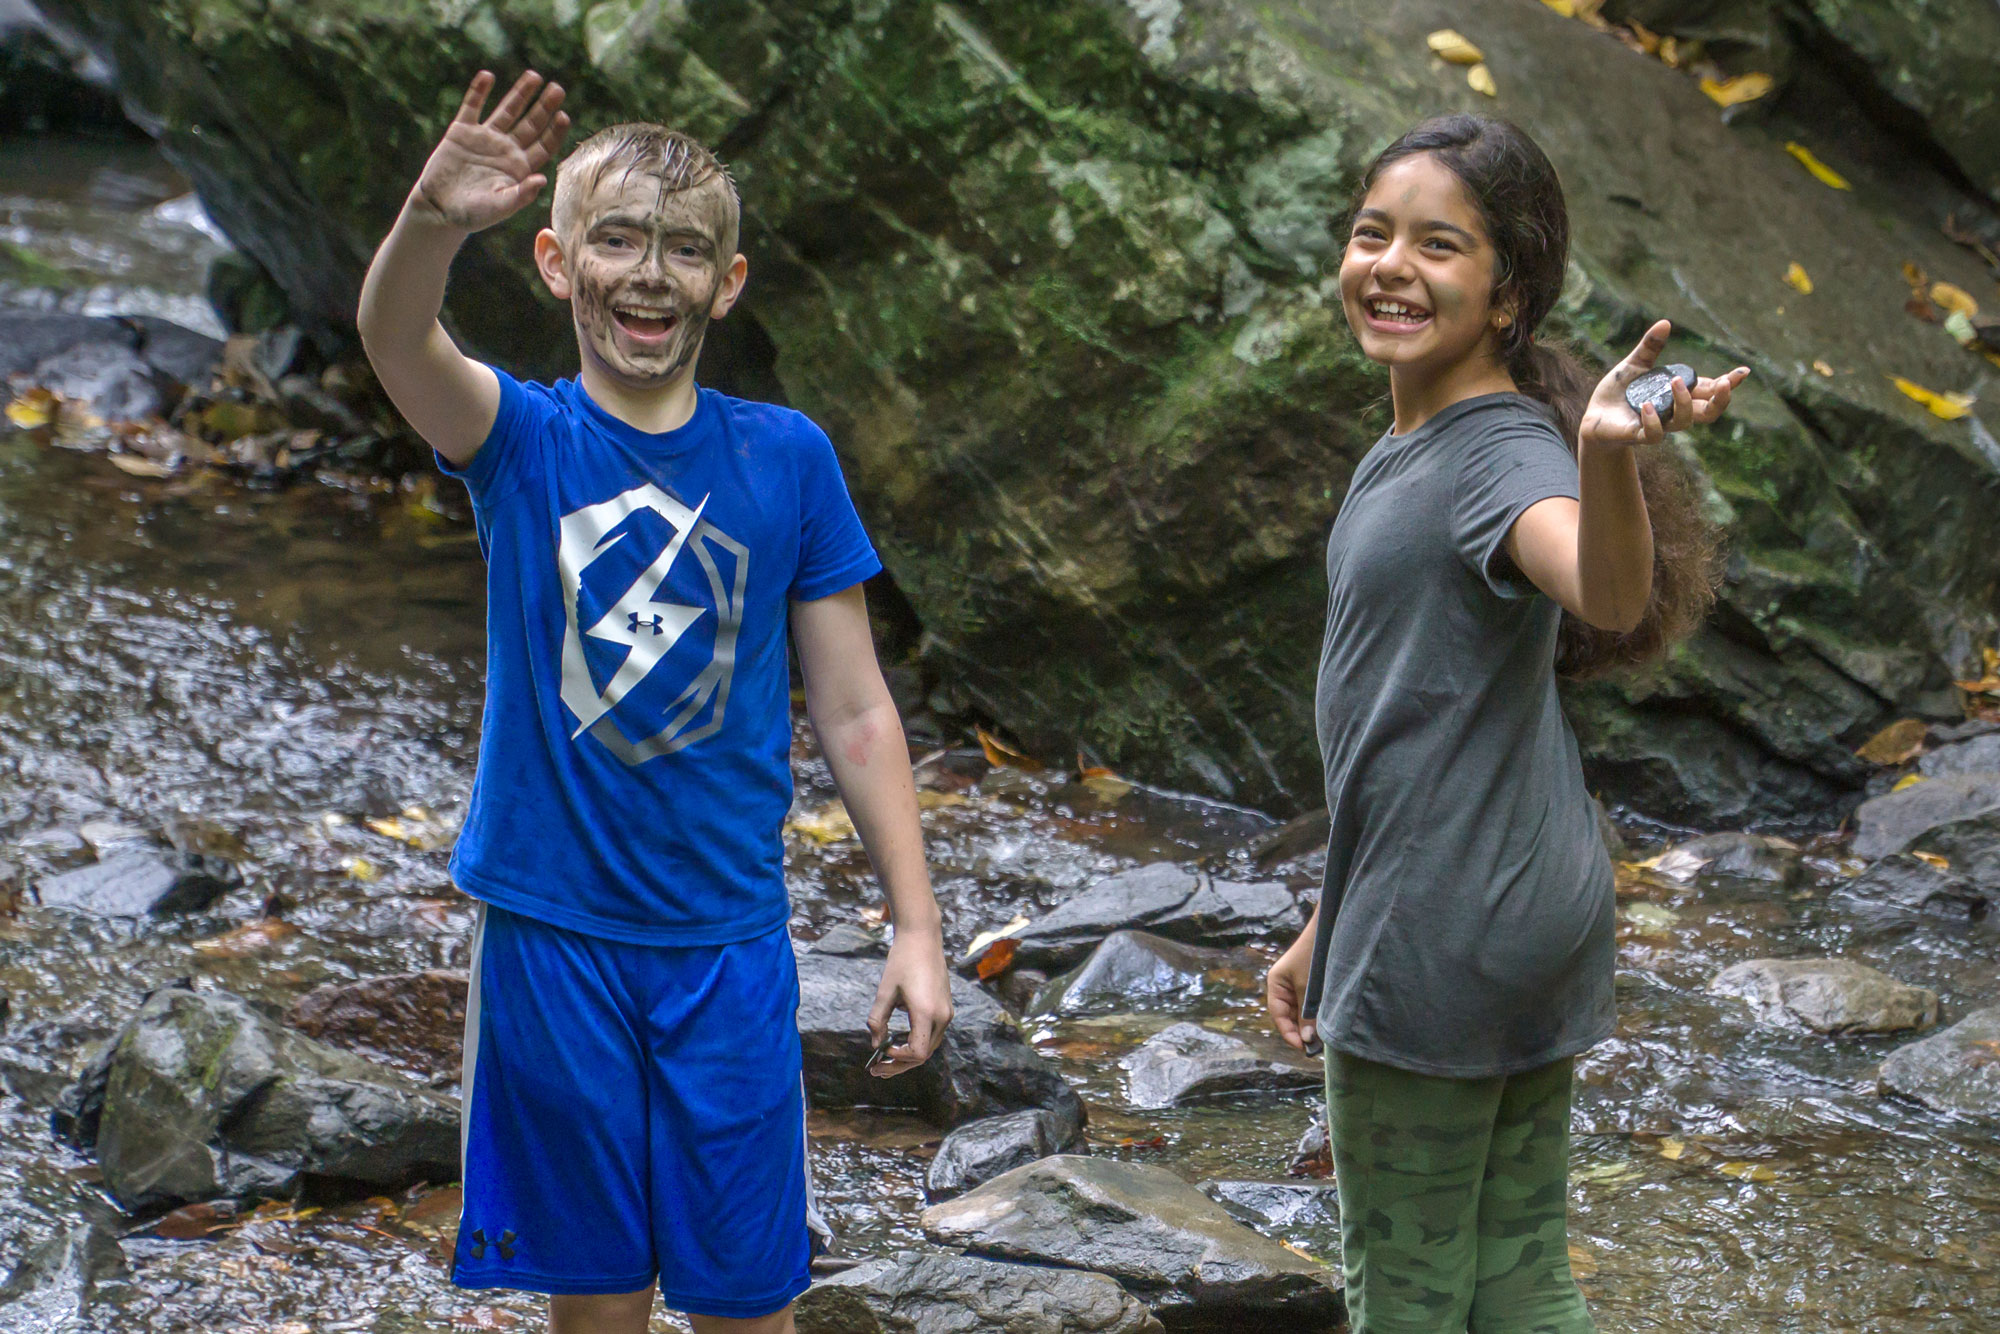 Two school children wave at the camera while playing in water at the base of a waterfall in the Smokies